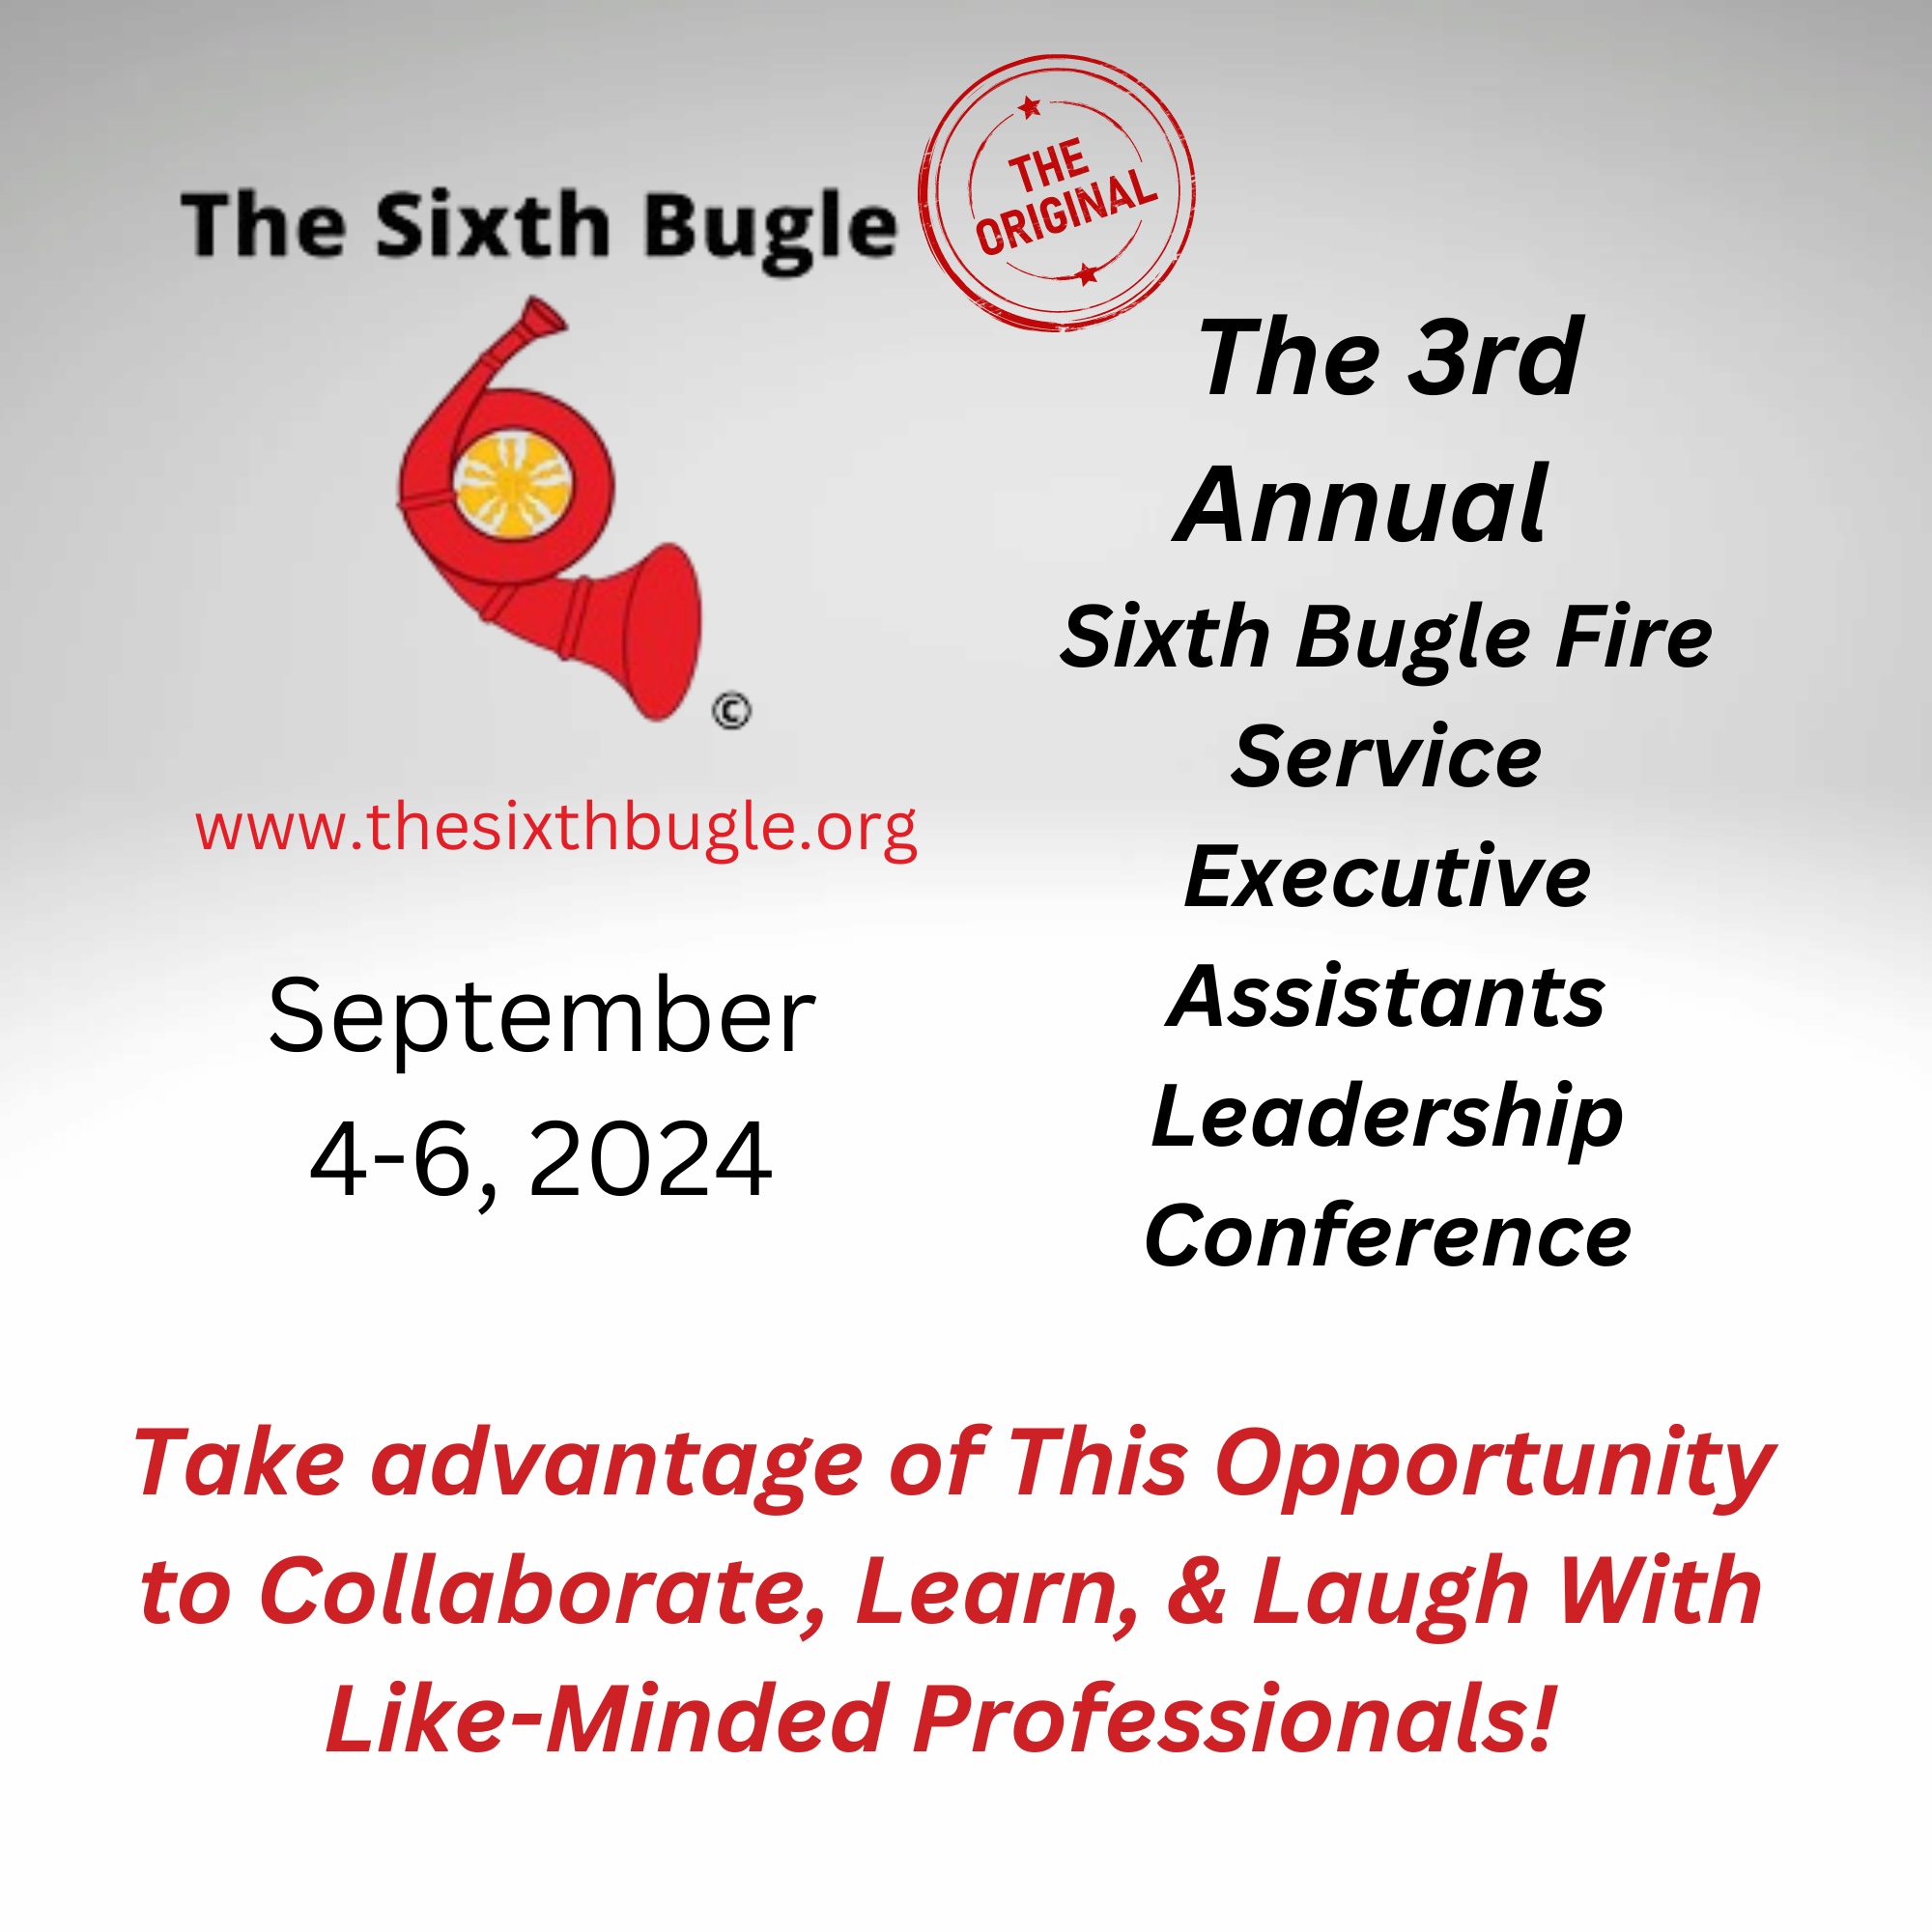 Perrysburg Fire/The Sixth Bugle Conference